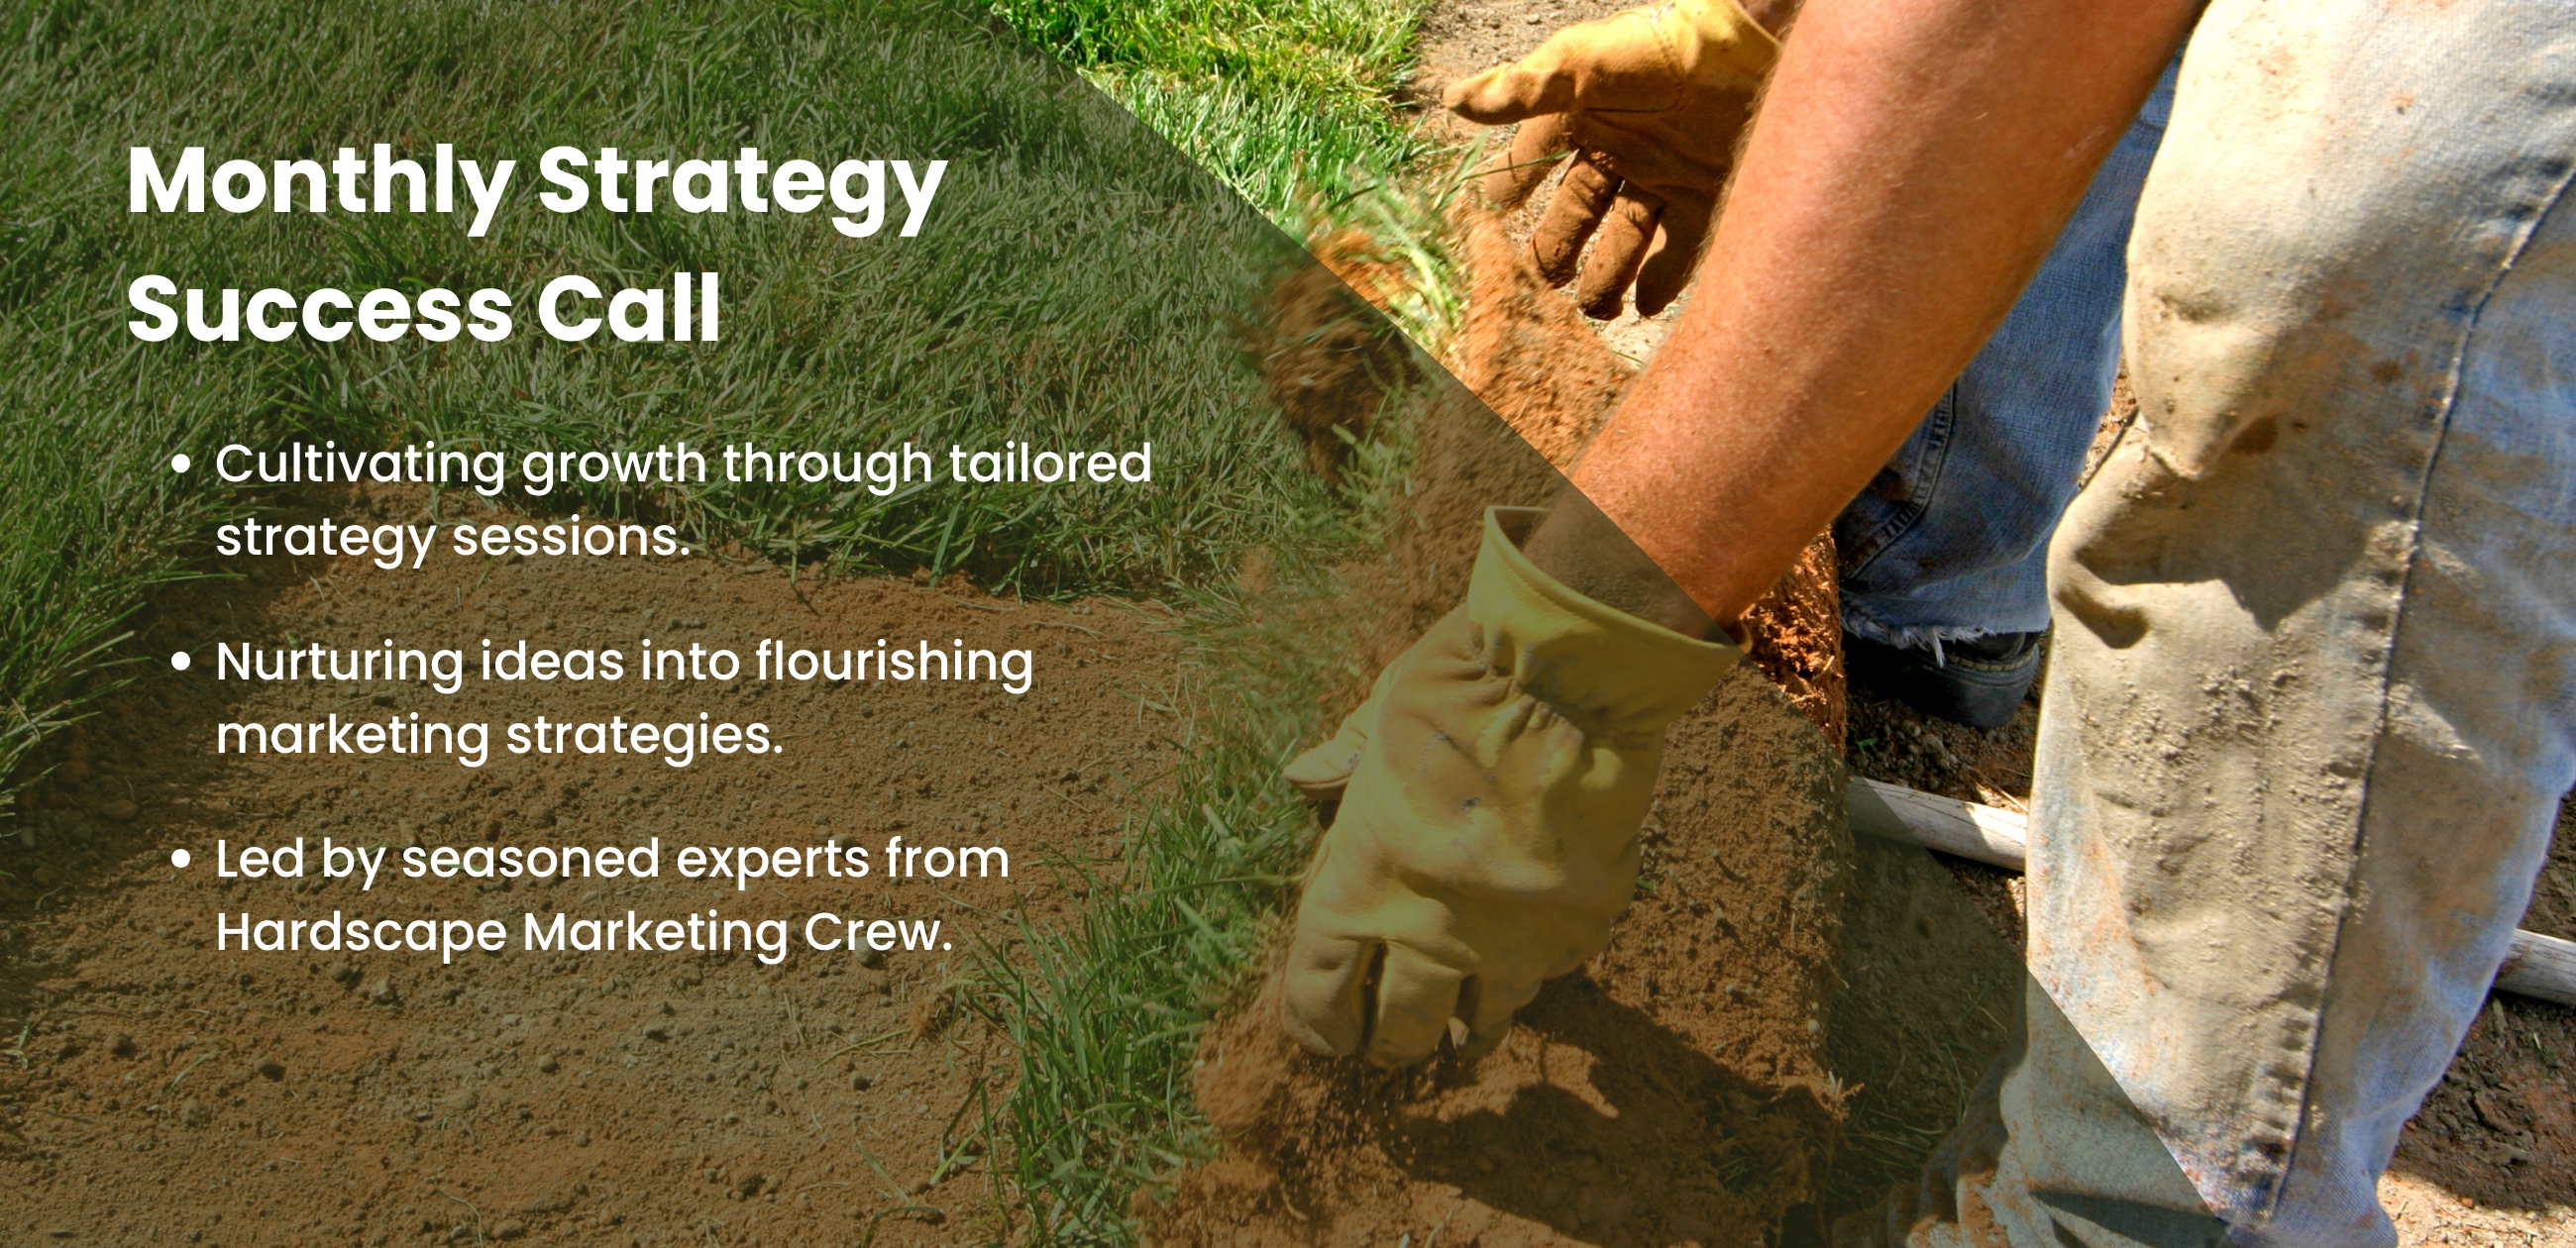 Monthly Strategy Success Call: Cultivating Growth